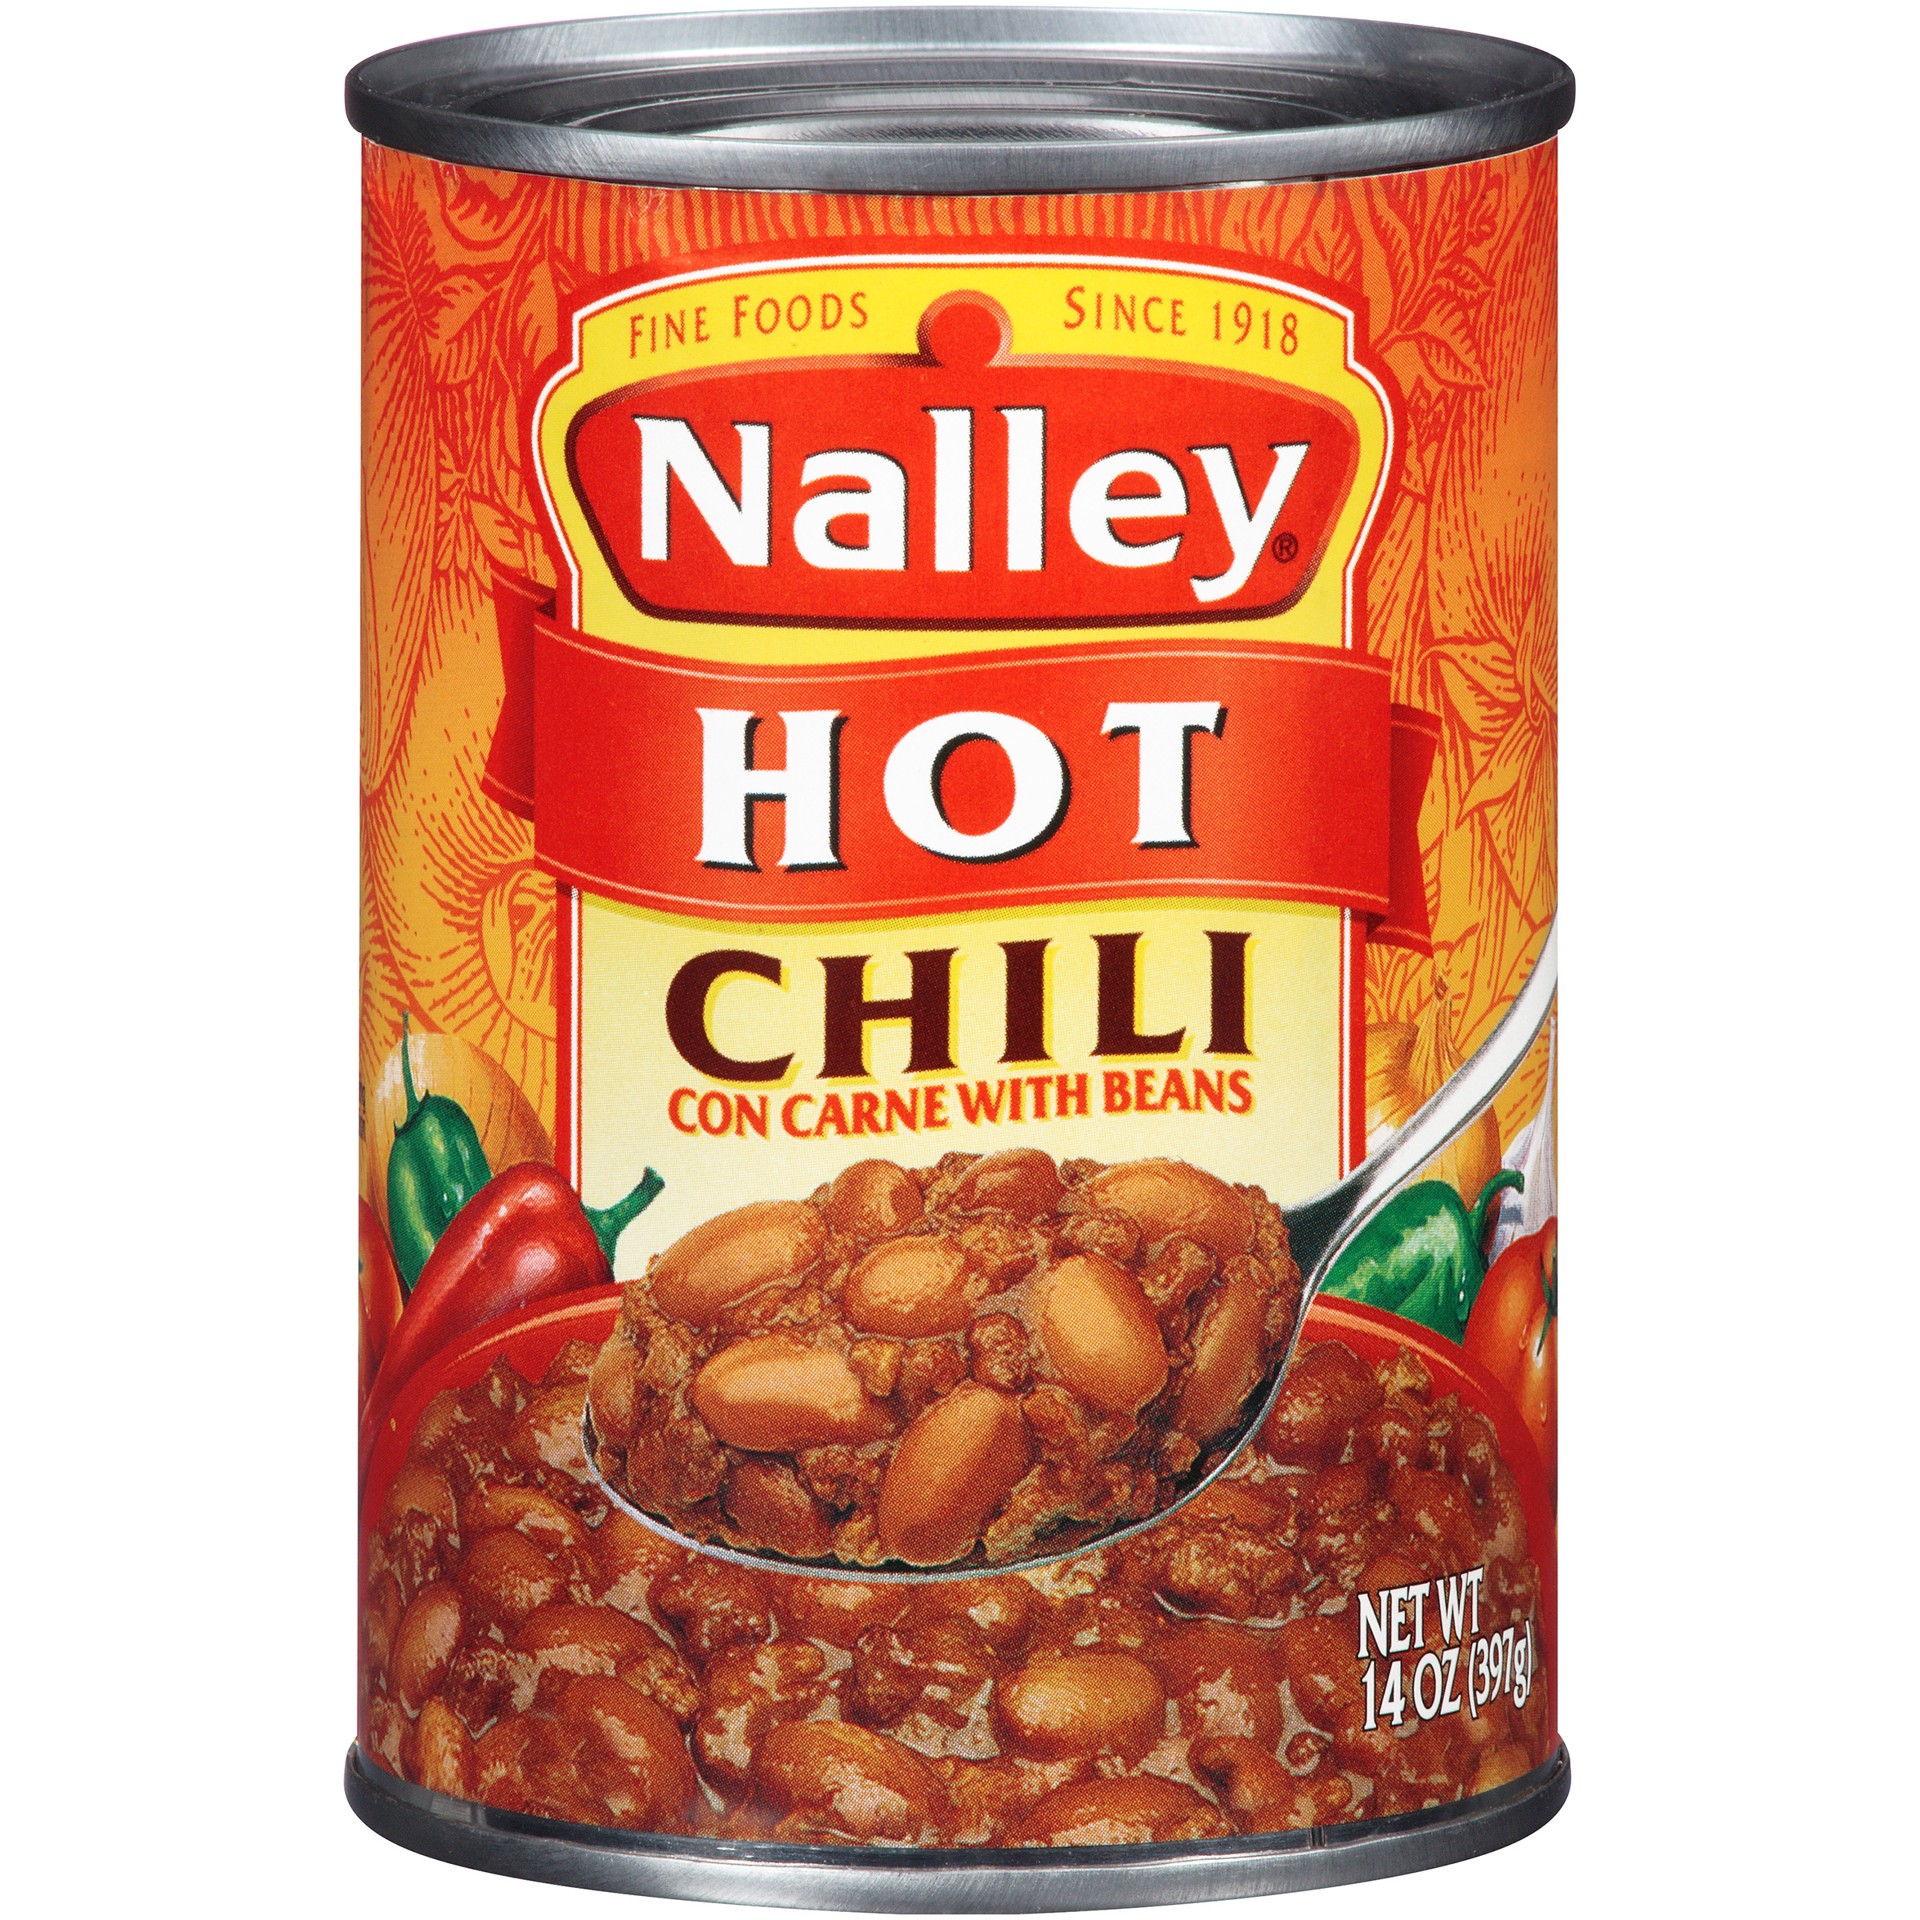 slide 1 of 2, Nalley Hot Chili Con Carne With Beans, 14 oz., 14 oz